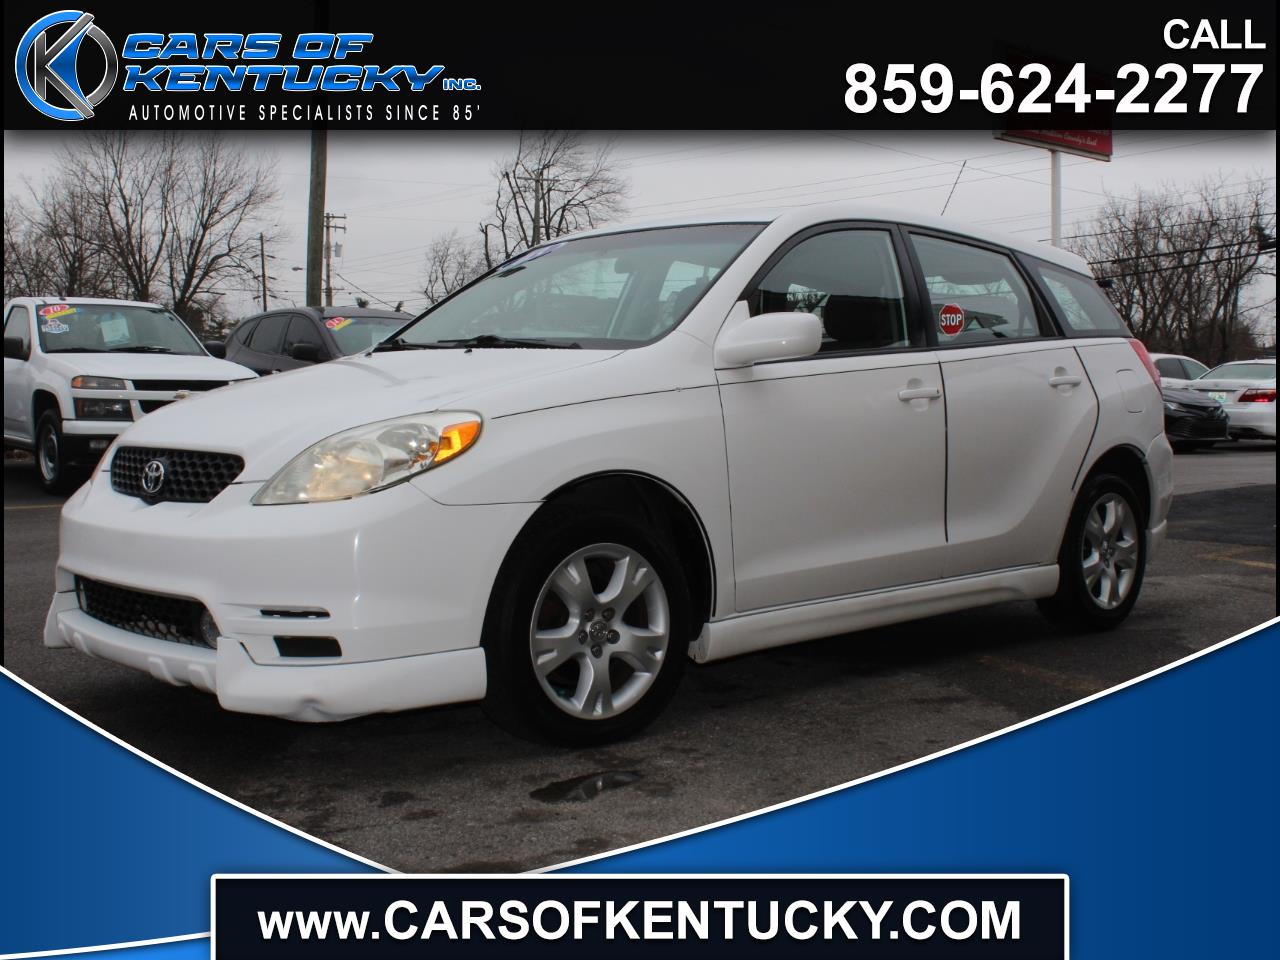 Used 2003 Toyota Matrix Xrs For Sale In Richmond Ky 40475